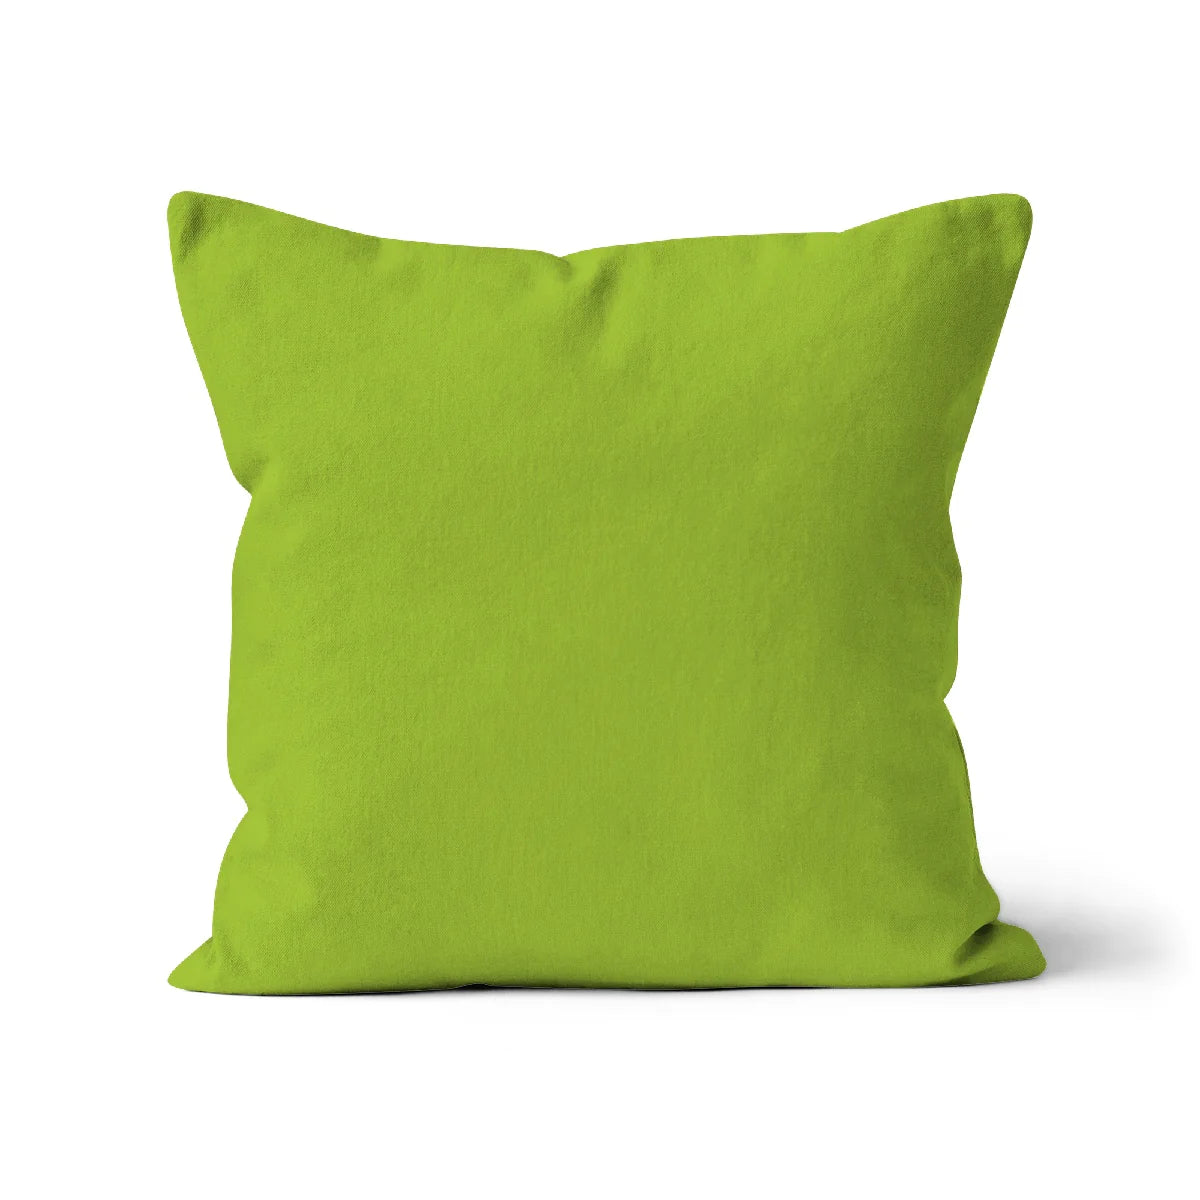 Designer Sustainable Pillow Cover, Green Organic Cotton Cushion Cover with Nature Patterns, Rich Green Velvet Pillowcase in Organic Cotton, Bright Green Organic Cotton Cushion Cover for Sale, Eco-Friendly Soft Furnishings, Elegant Organic Cotton Bright Green Cushion cover